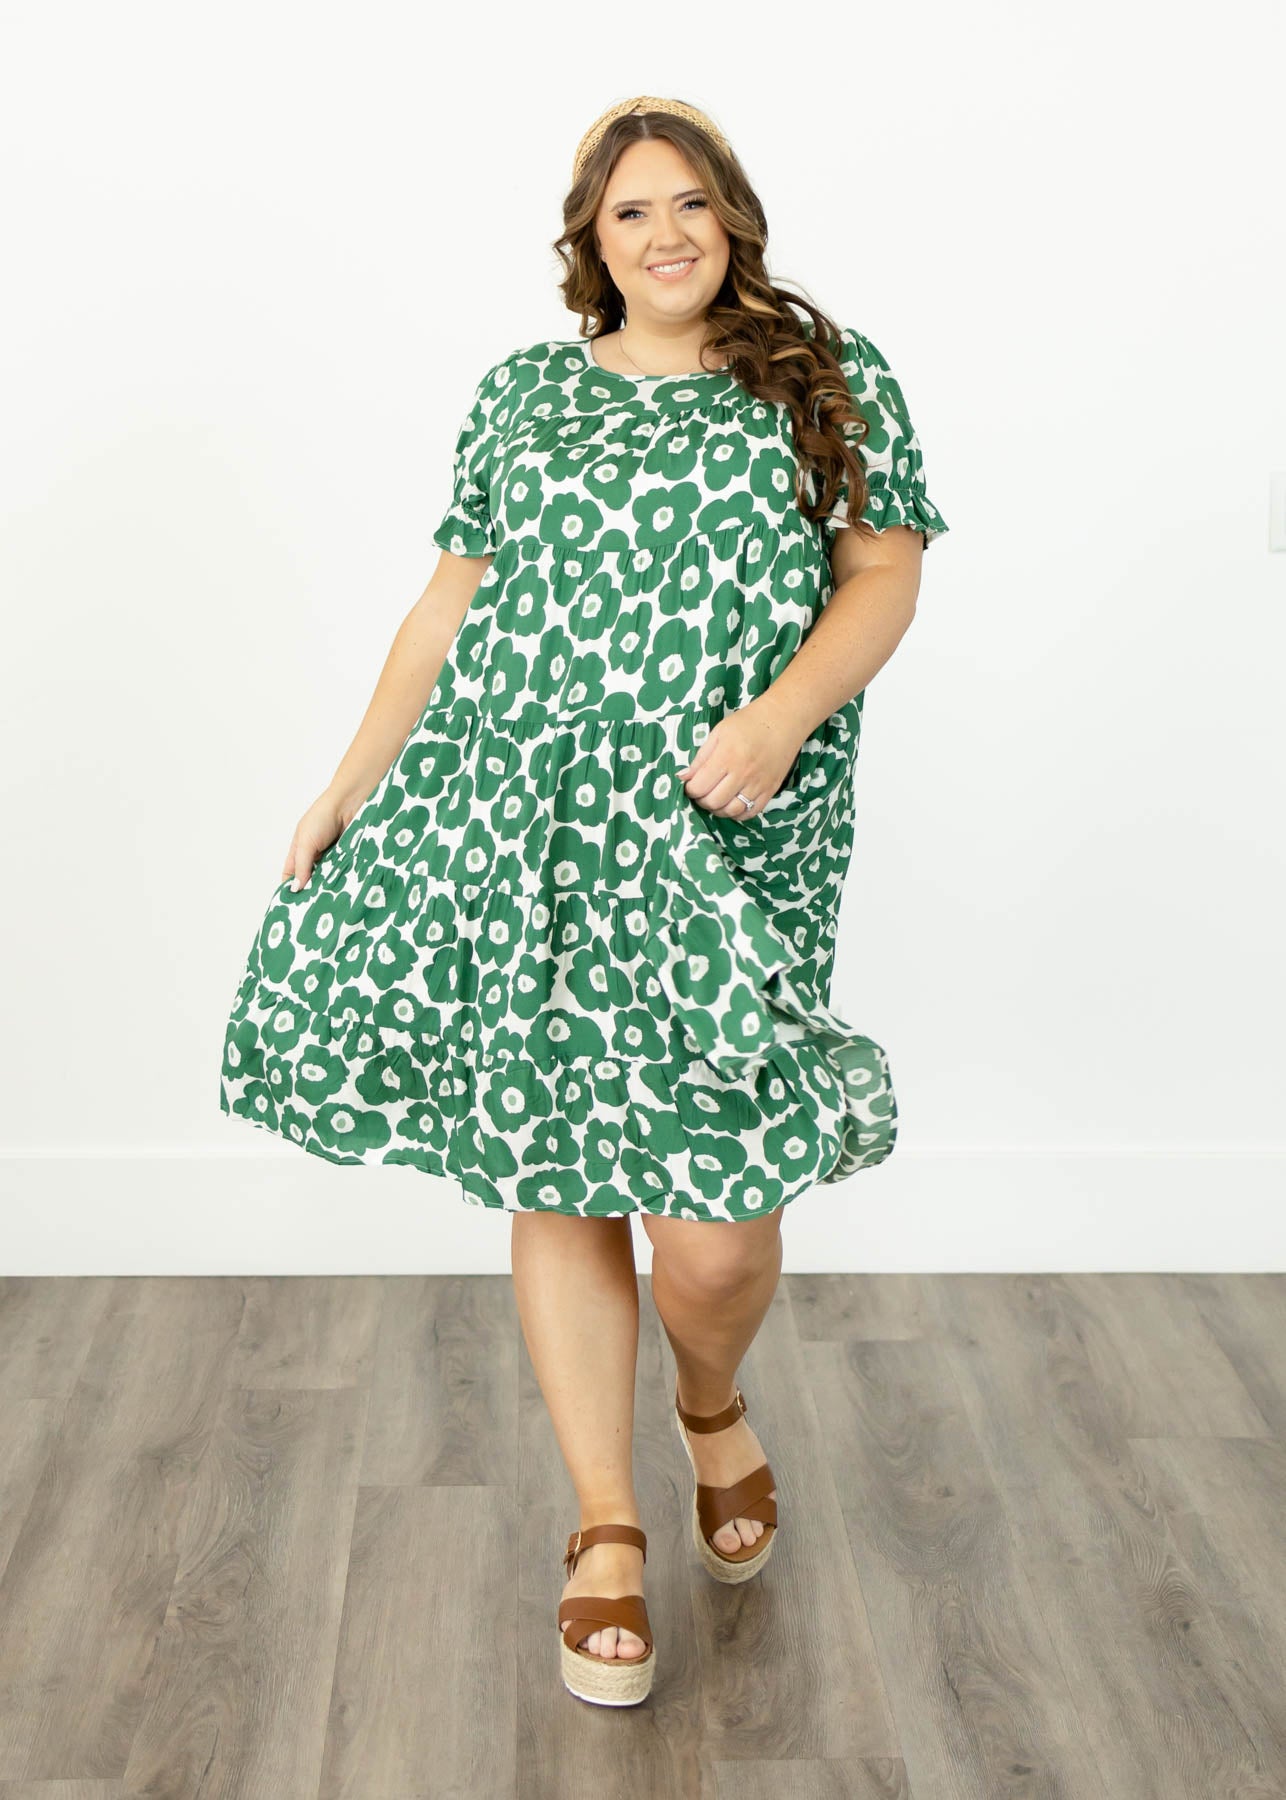 Short sleeve plus size green floral dress with pockets